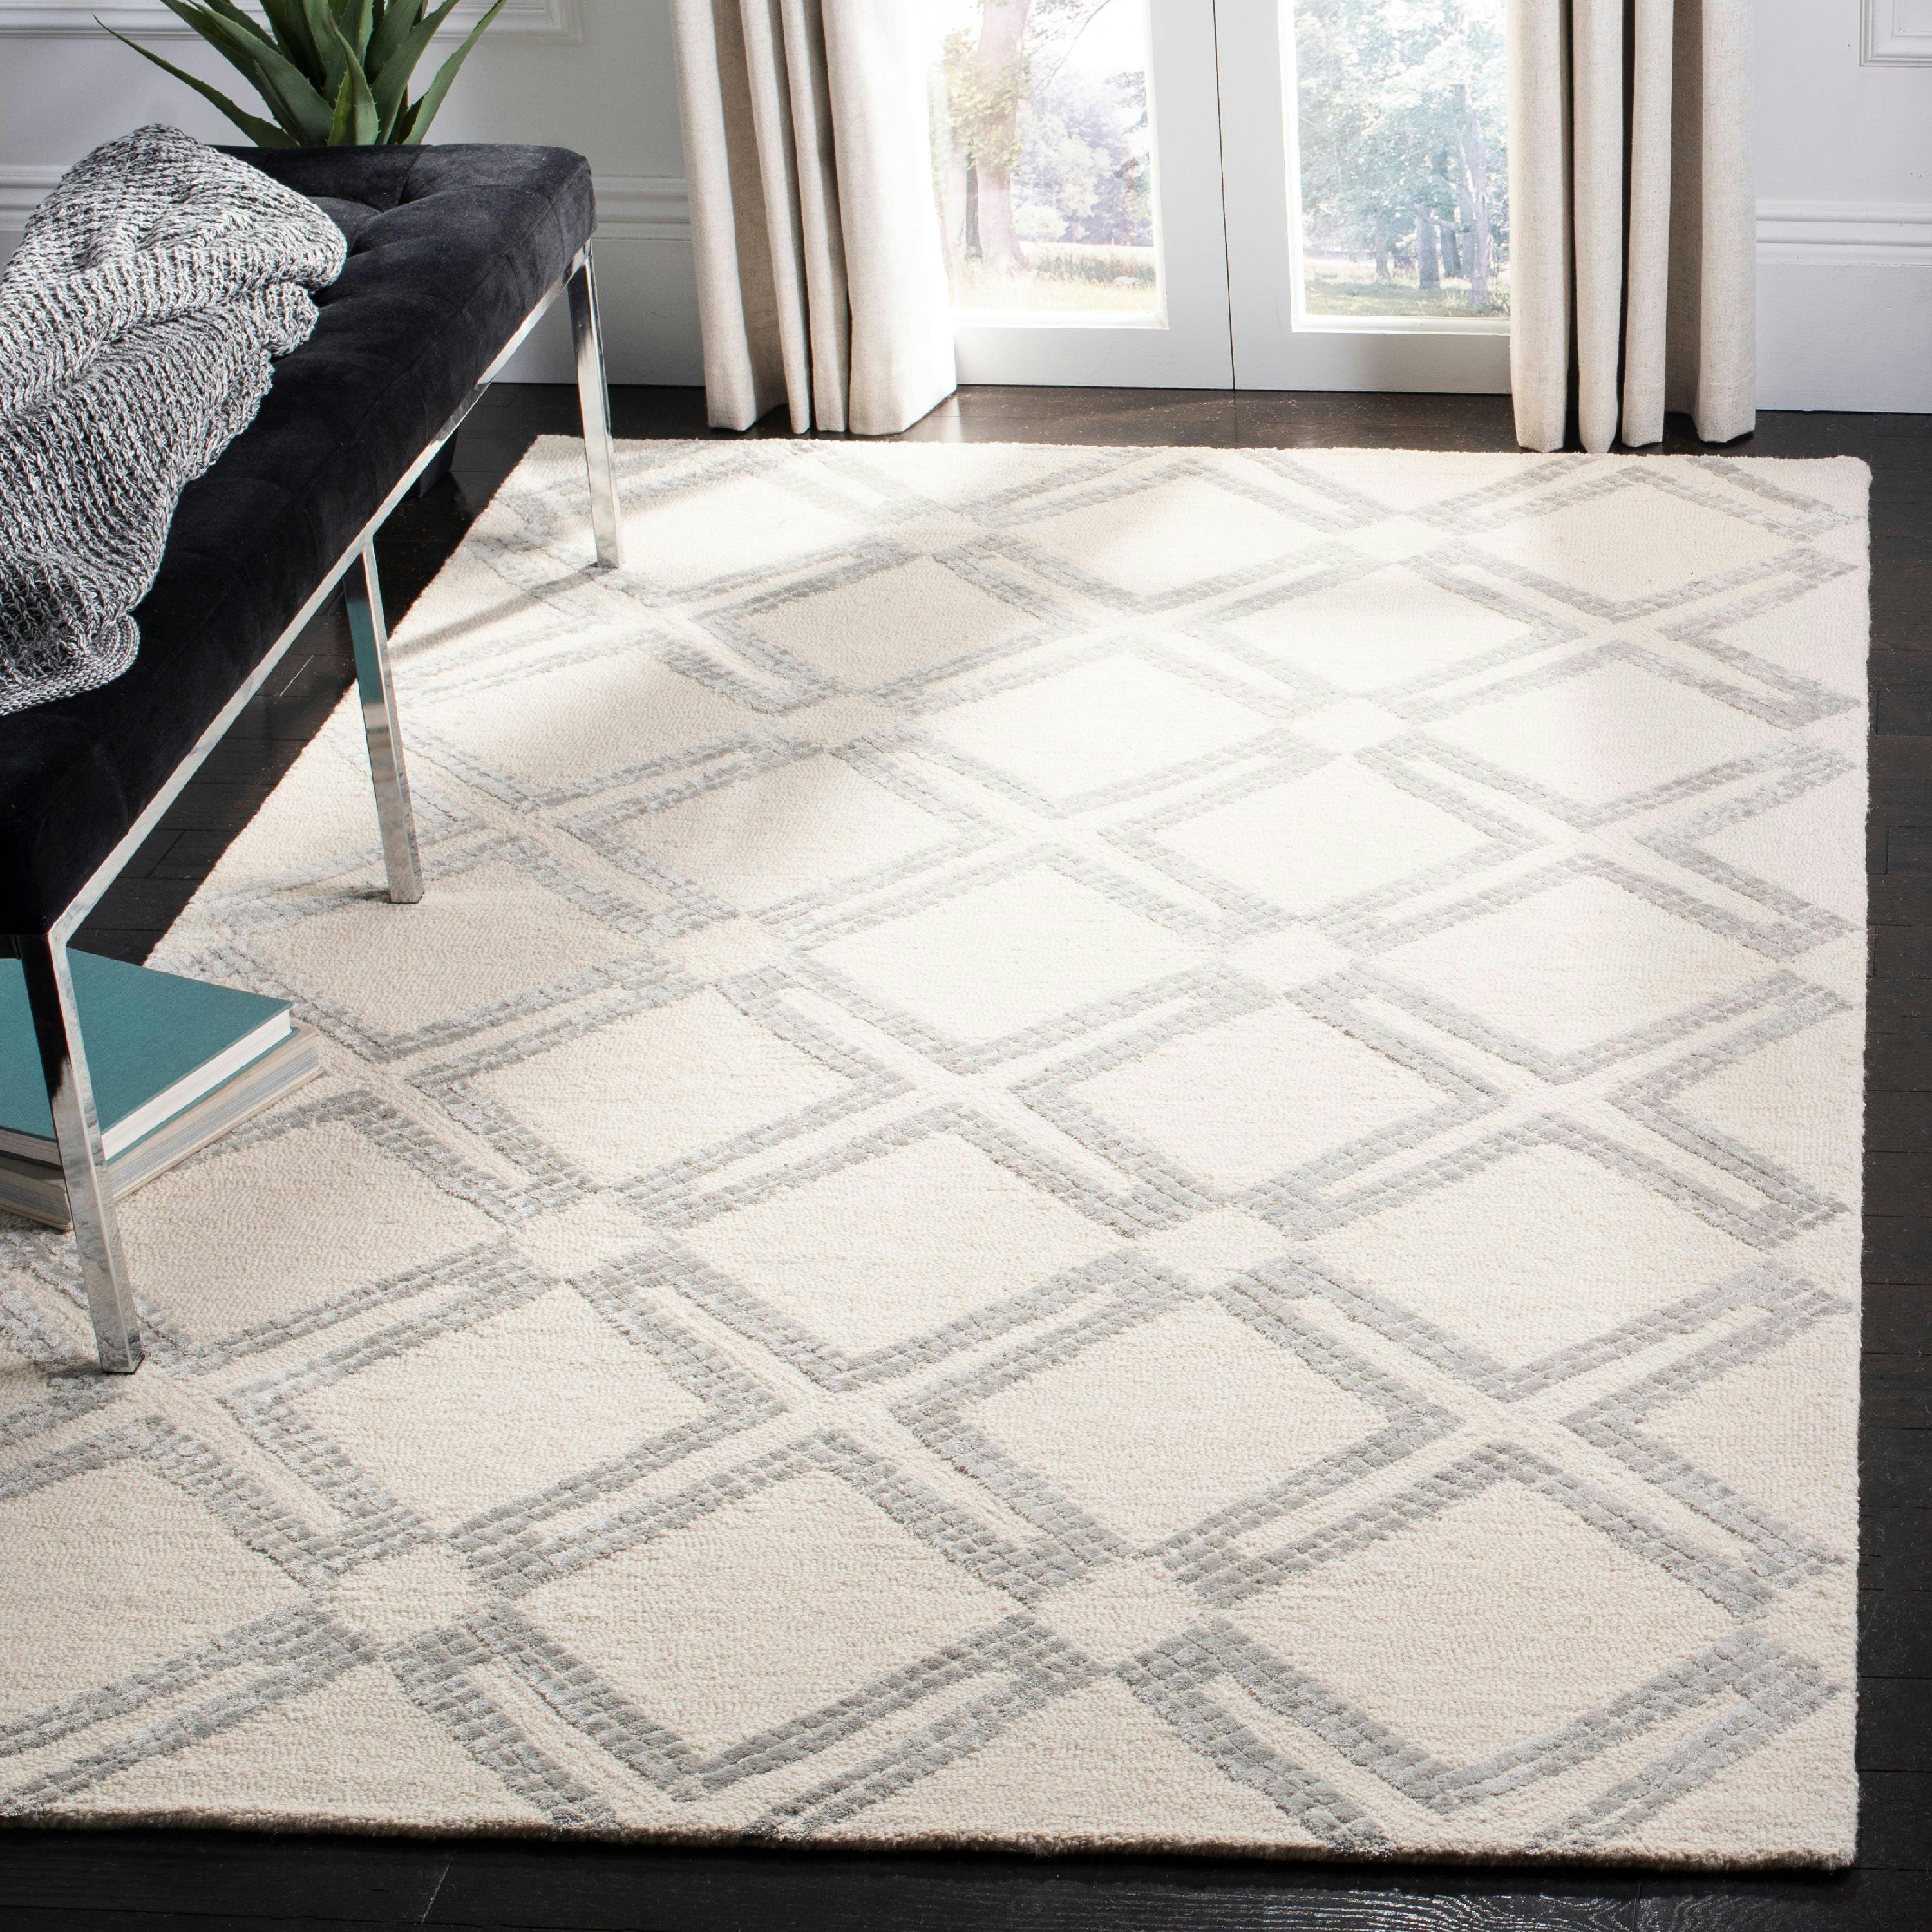 Handmade Ivory and Silver Tufted Wool-Viscose Square Area Rug 8' x 10'